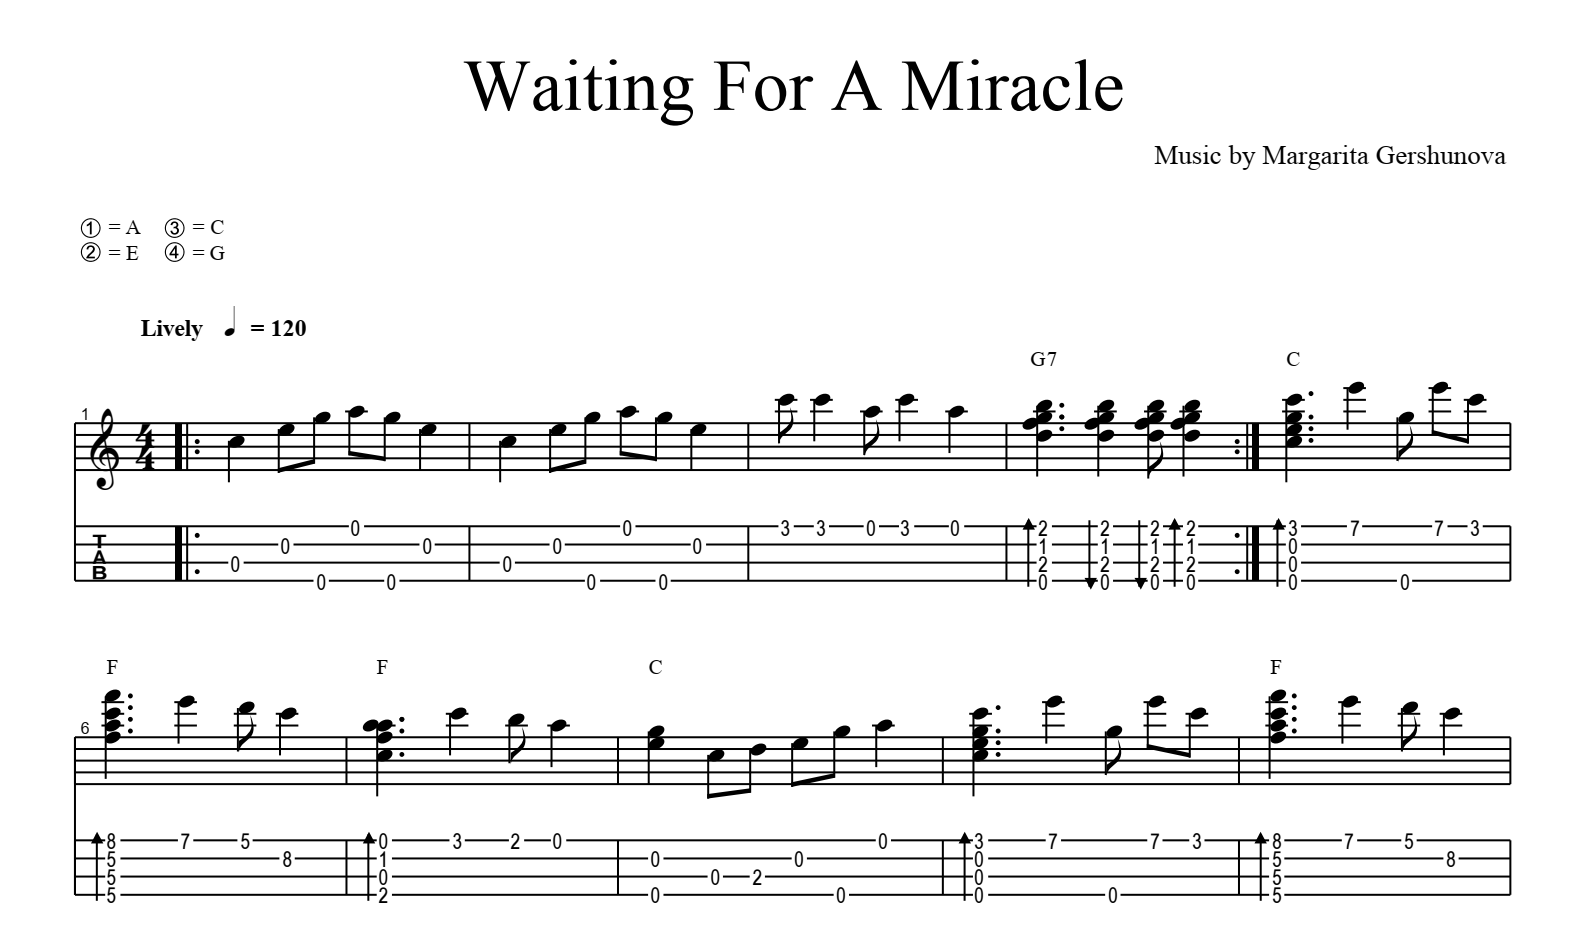 Waiting for a Miracle for guitar. Guitar sheet music and tabs.